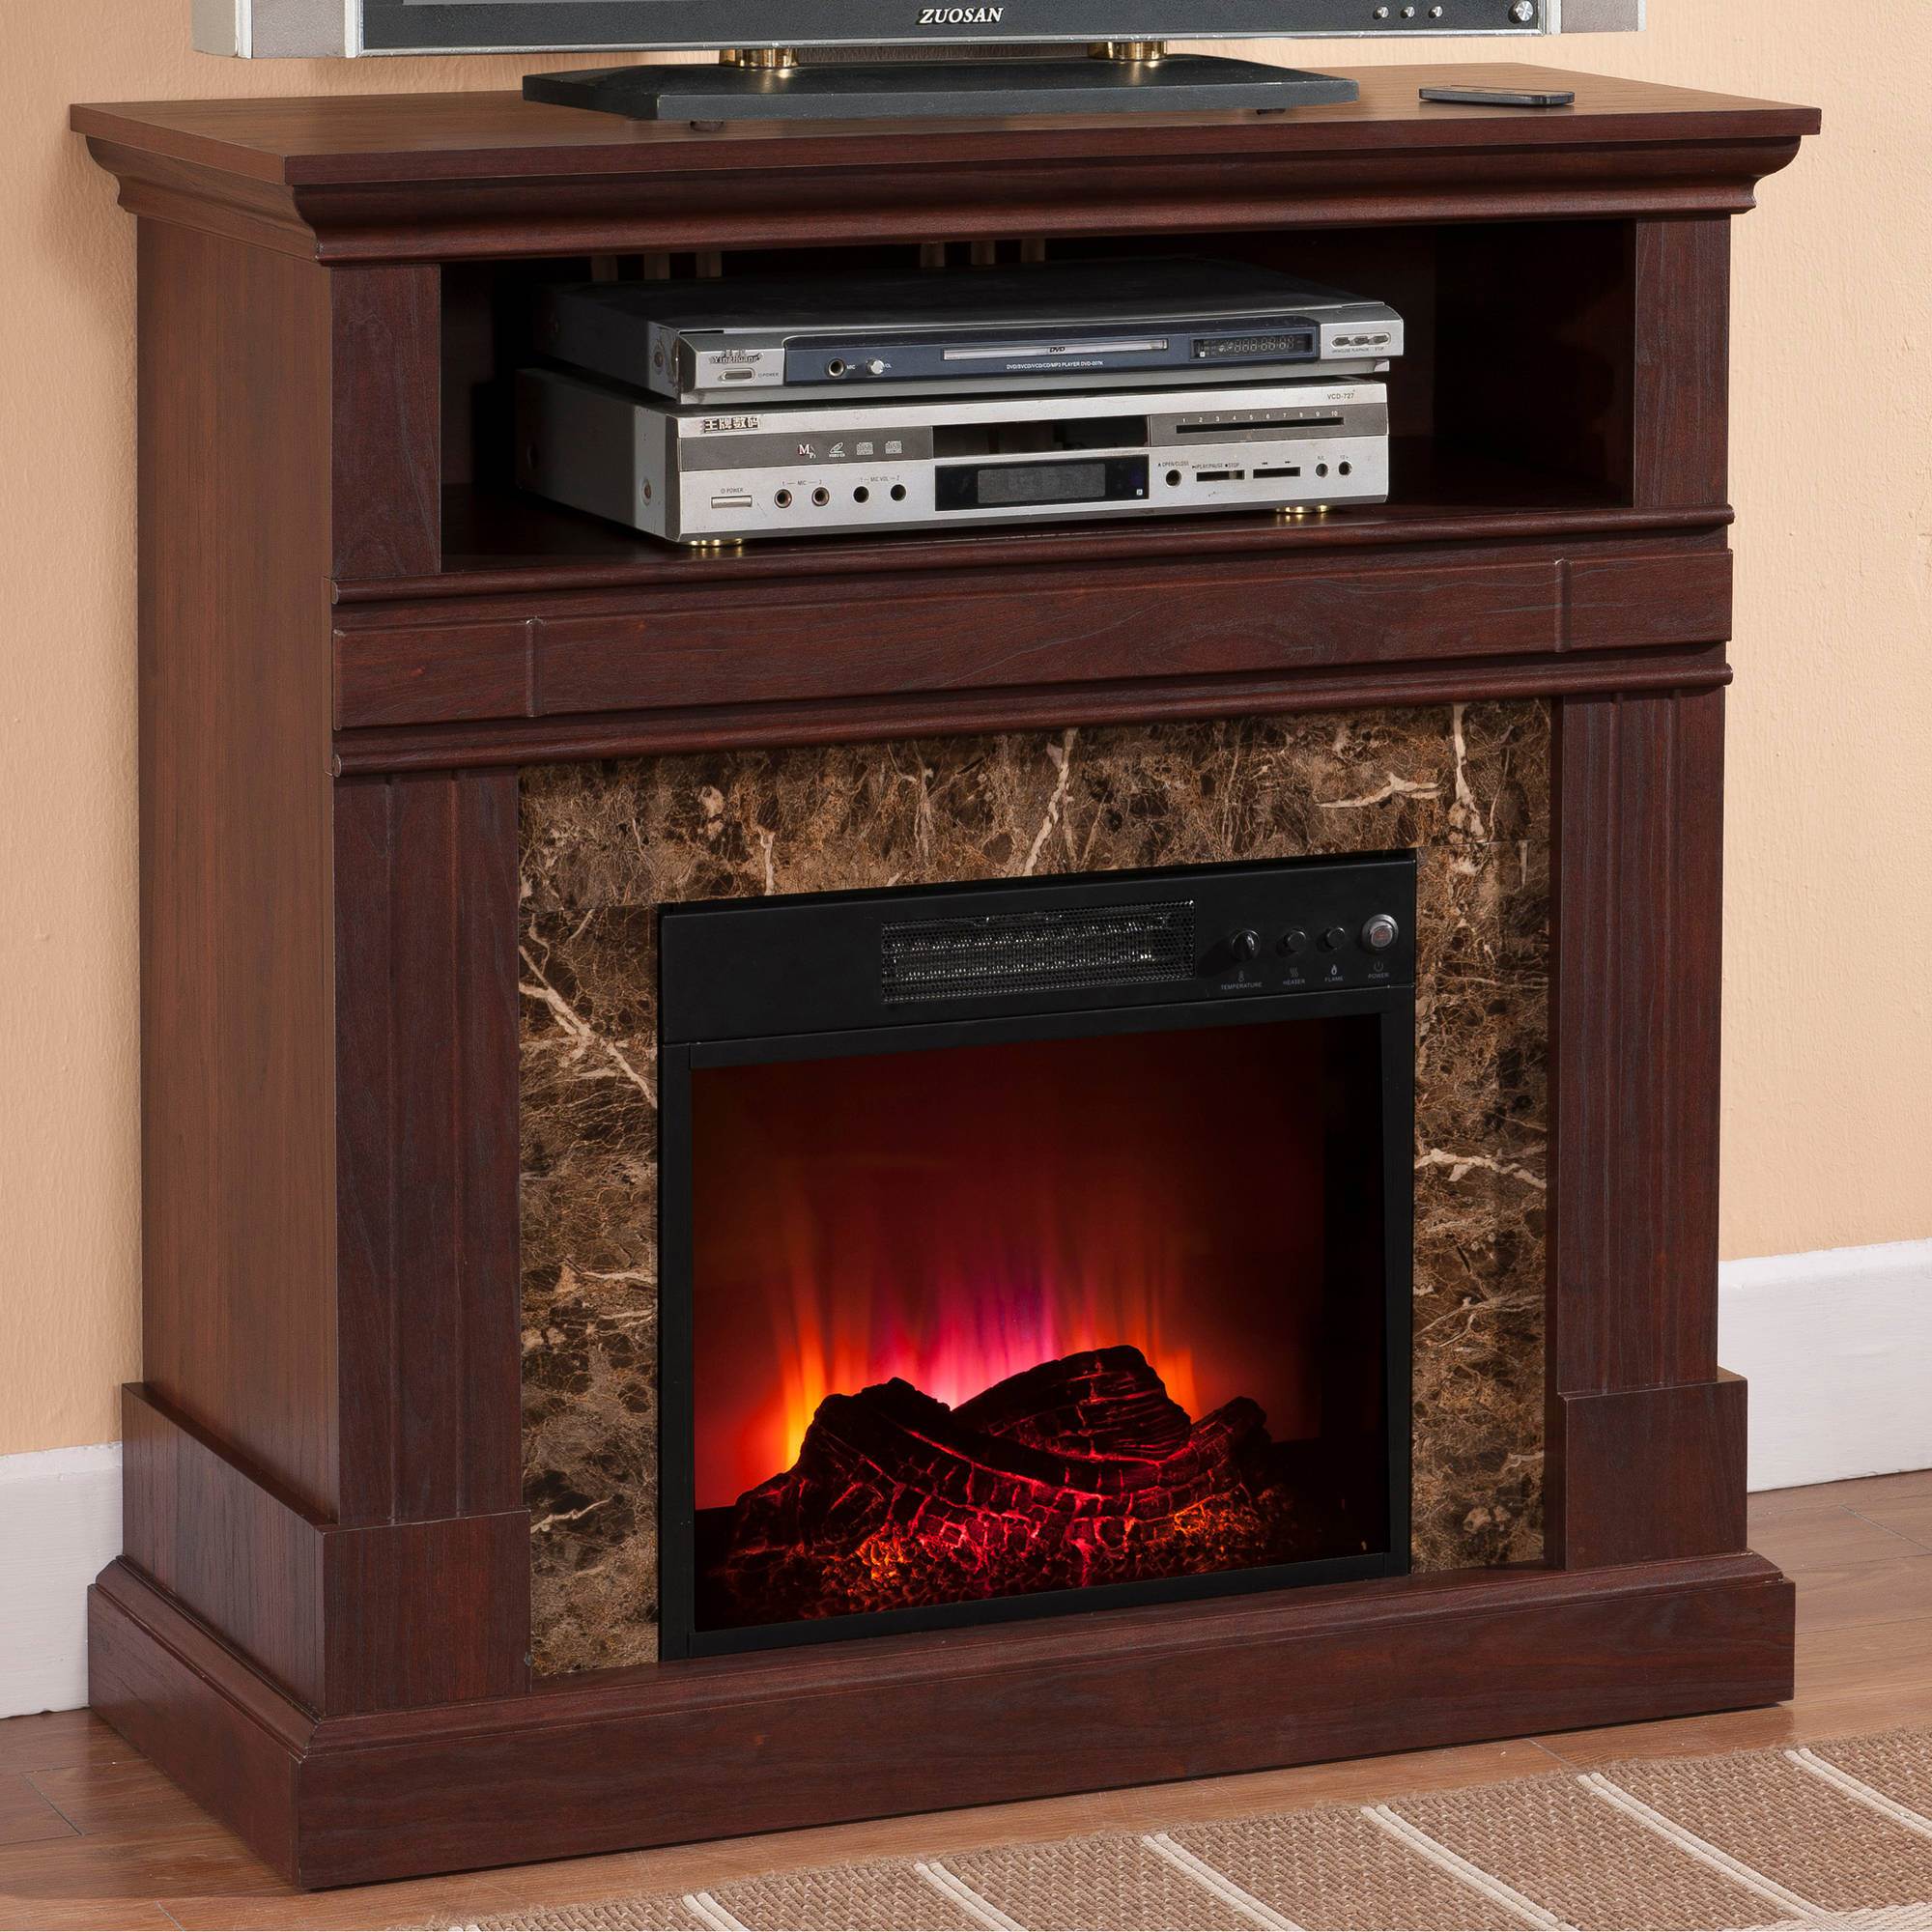 Fireplace Heater Home Depot Elegant White Electric Fireplace Tv Stand